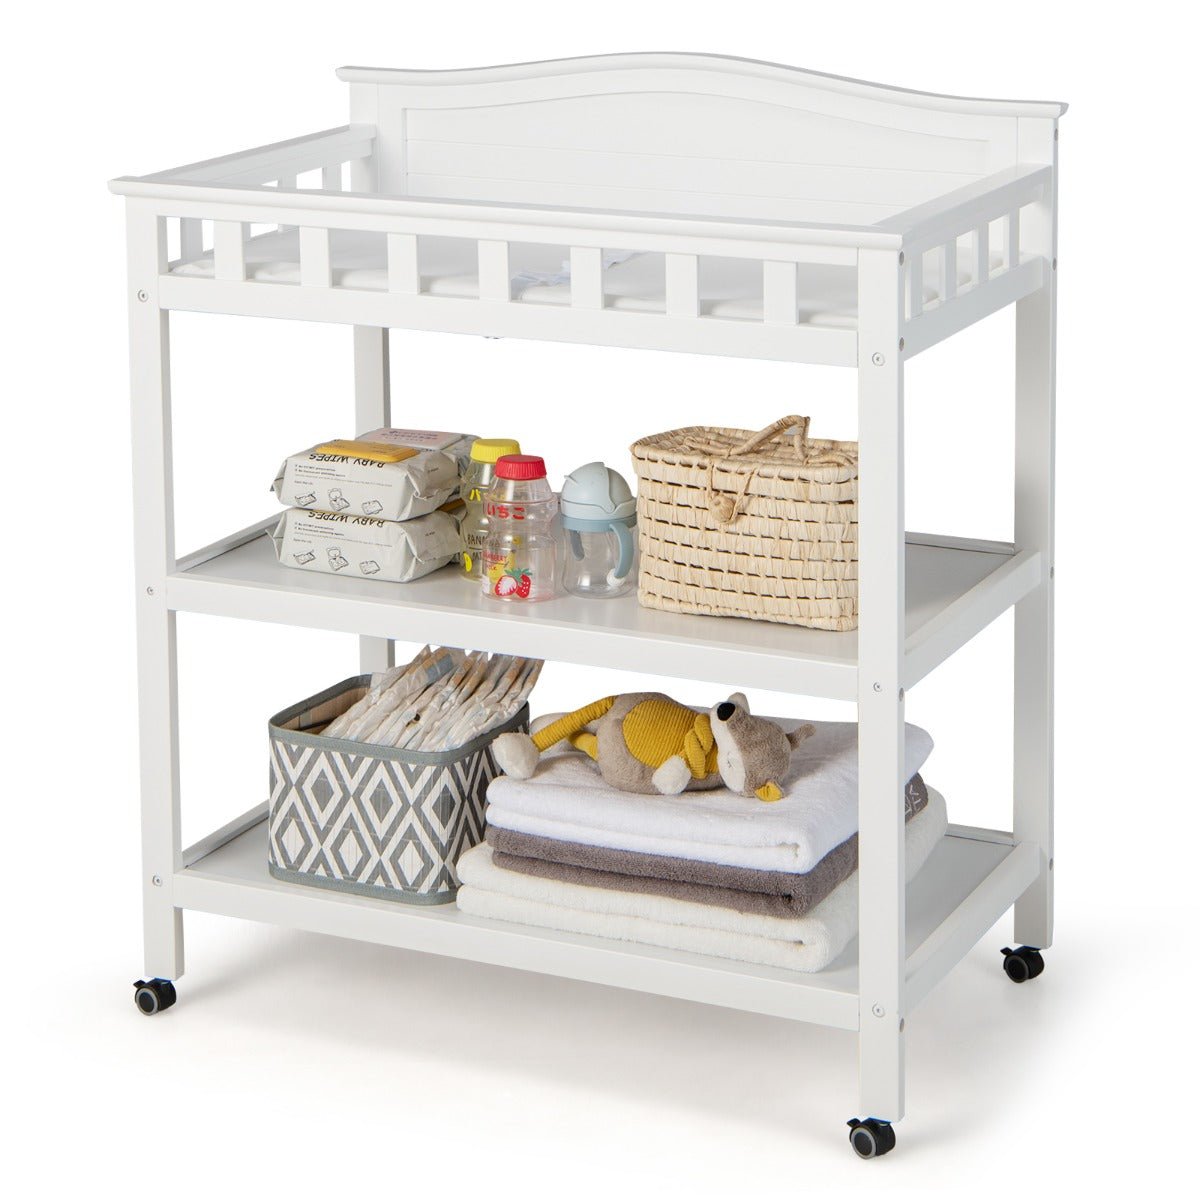 Mobile Baby Diaper Changing Station with Waterproof Pad & 2 Shelves